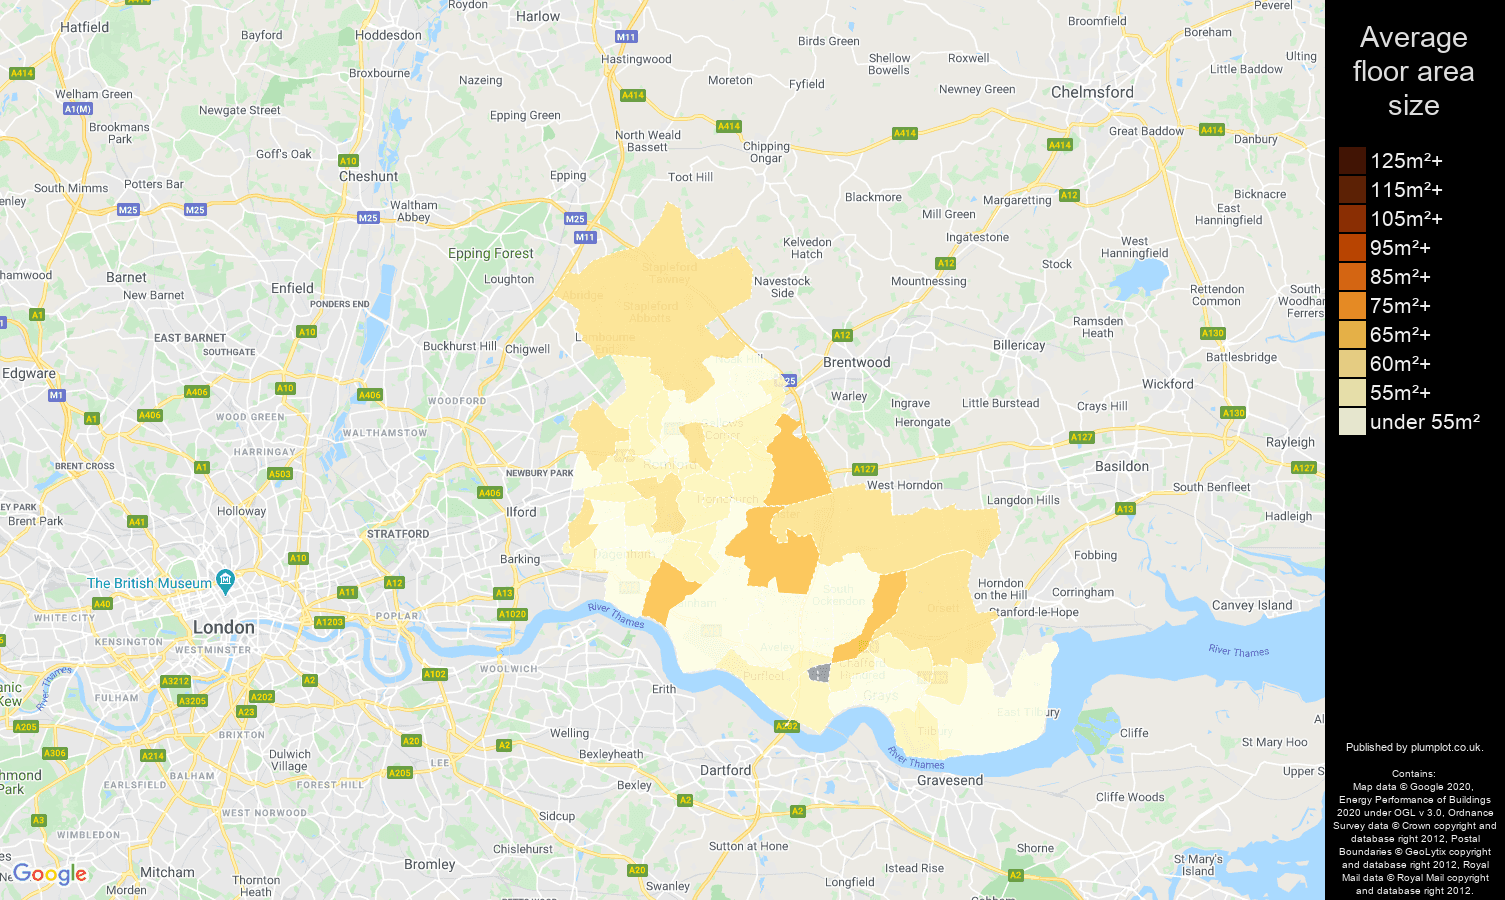 Romford map of average floor area size of flats